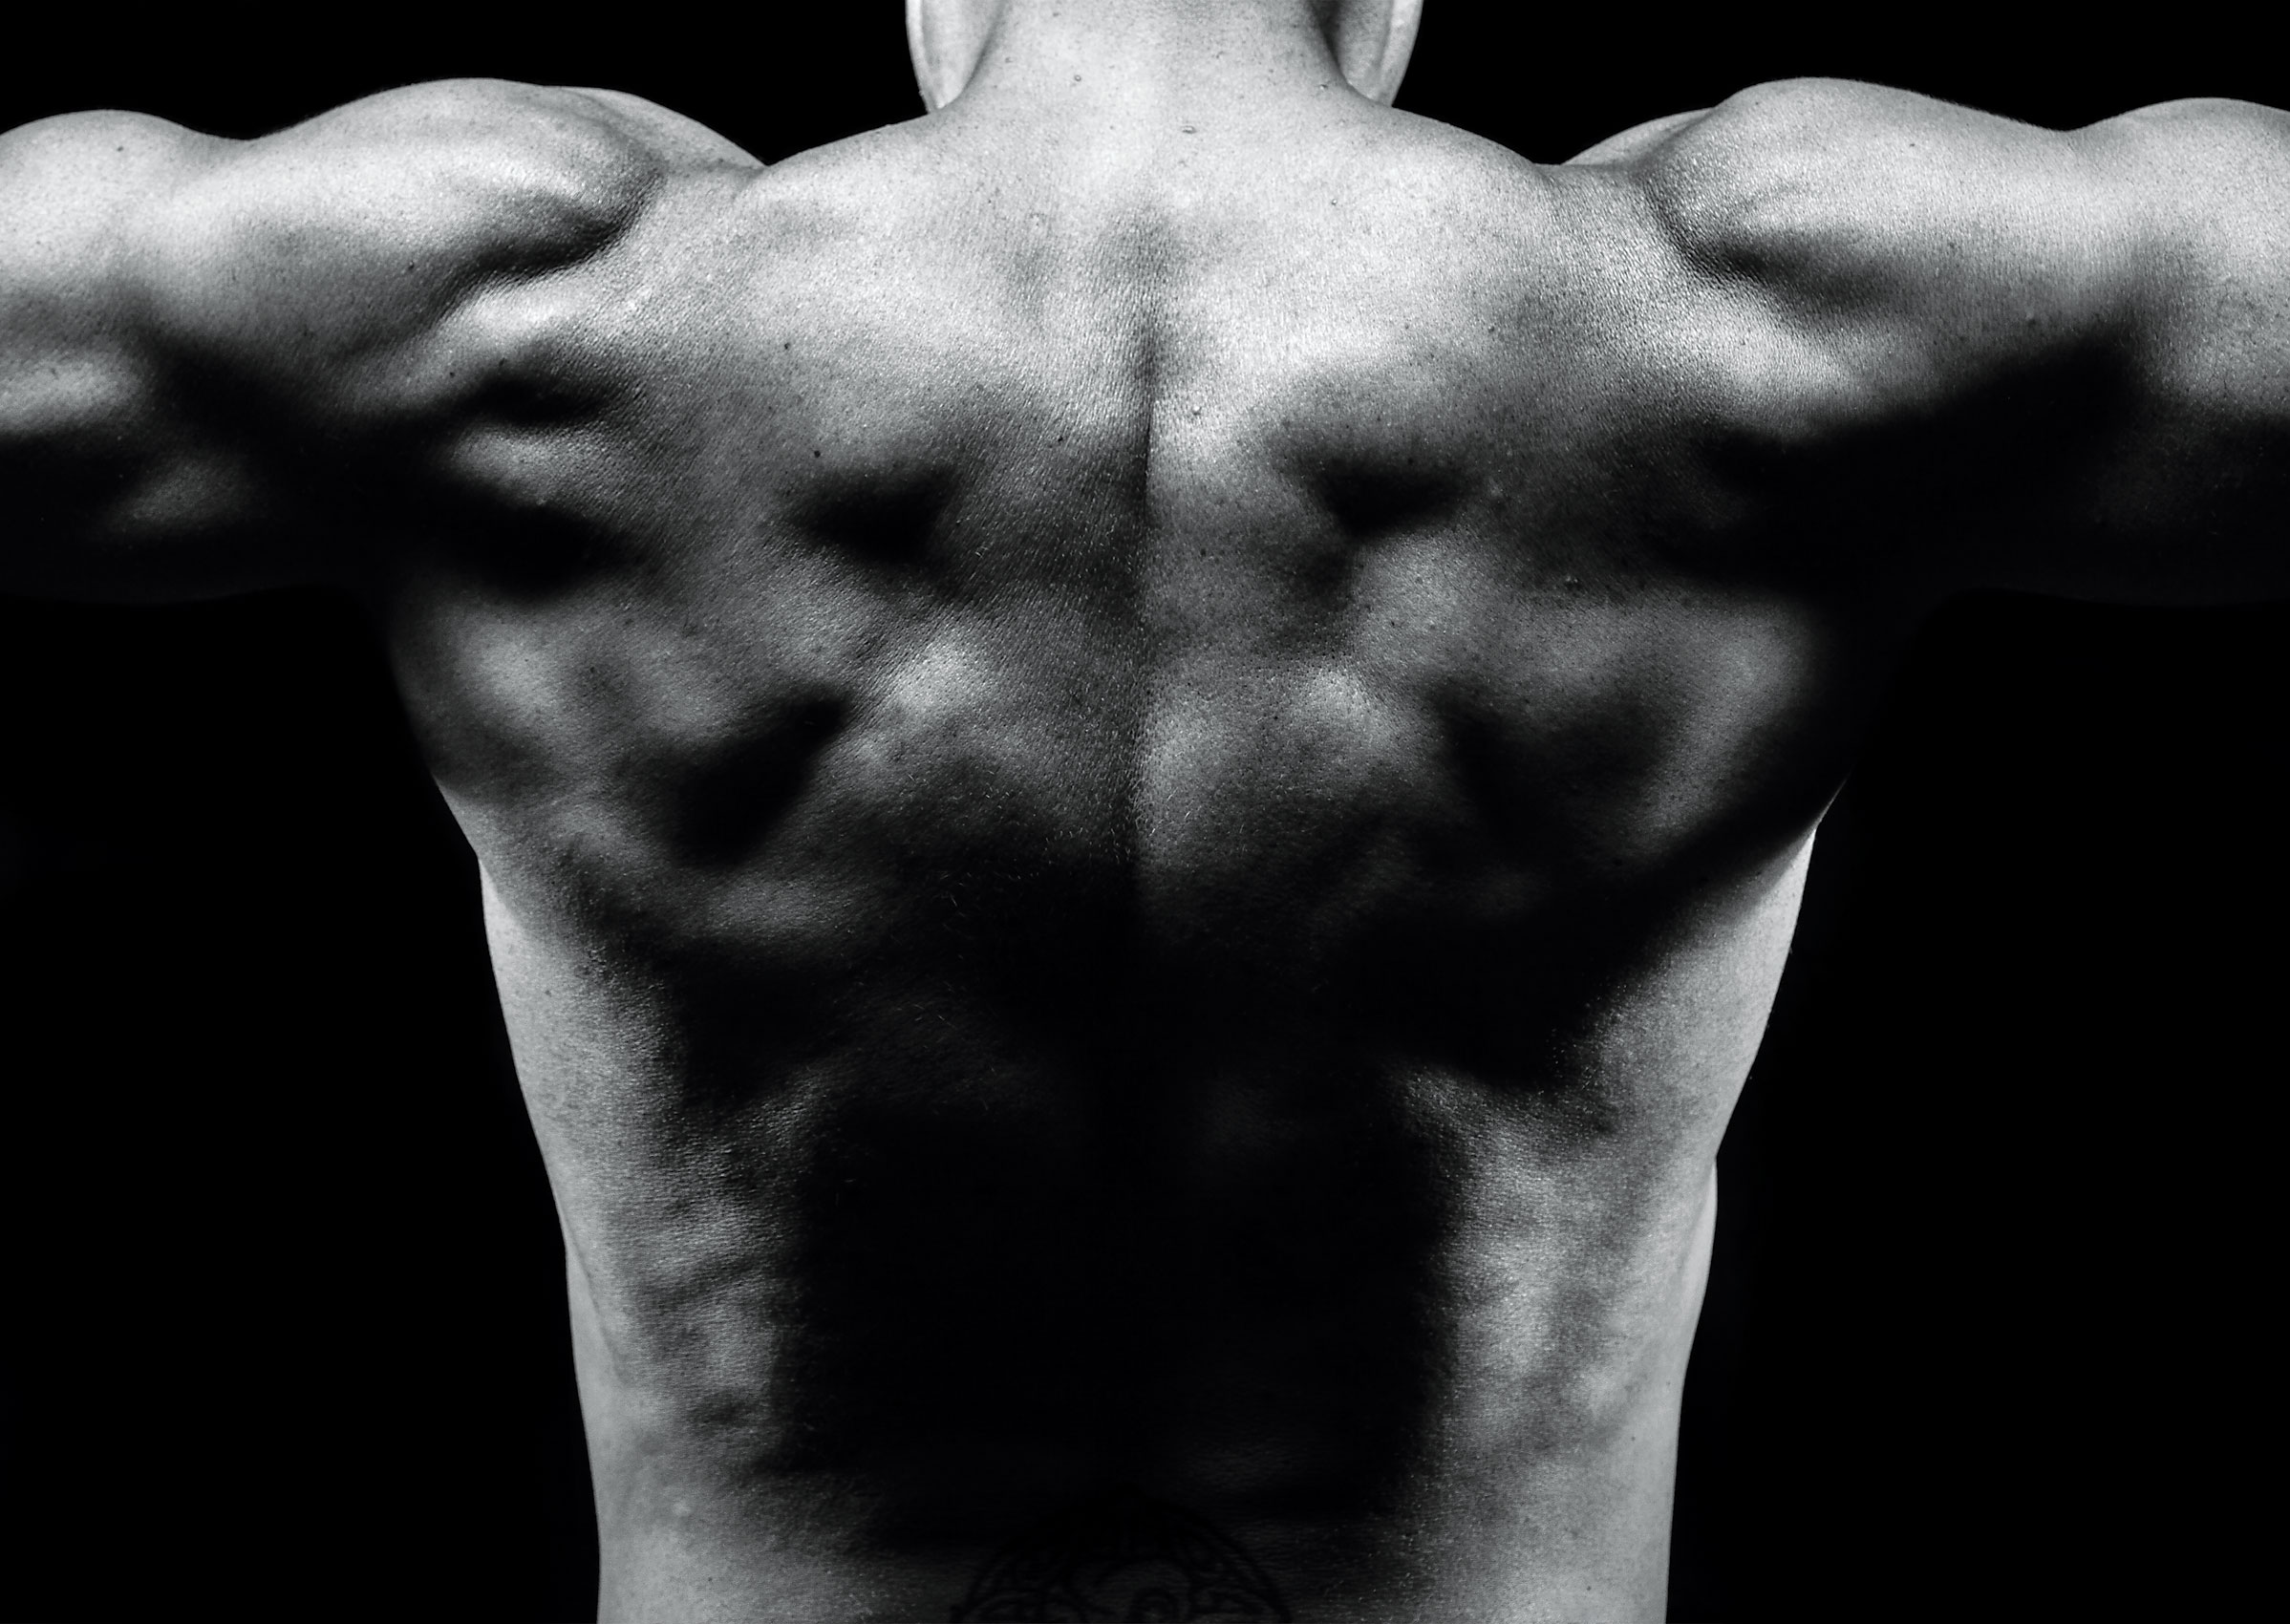 B&W photo of muscular male athlete flexing his back in gym